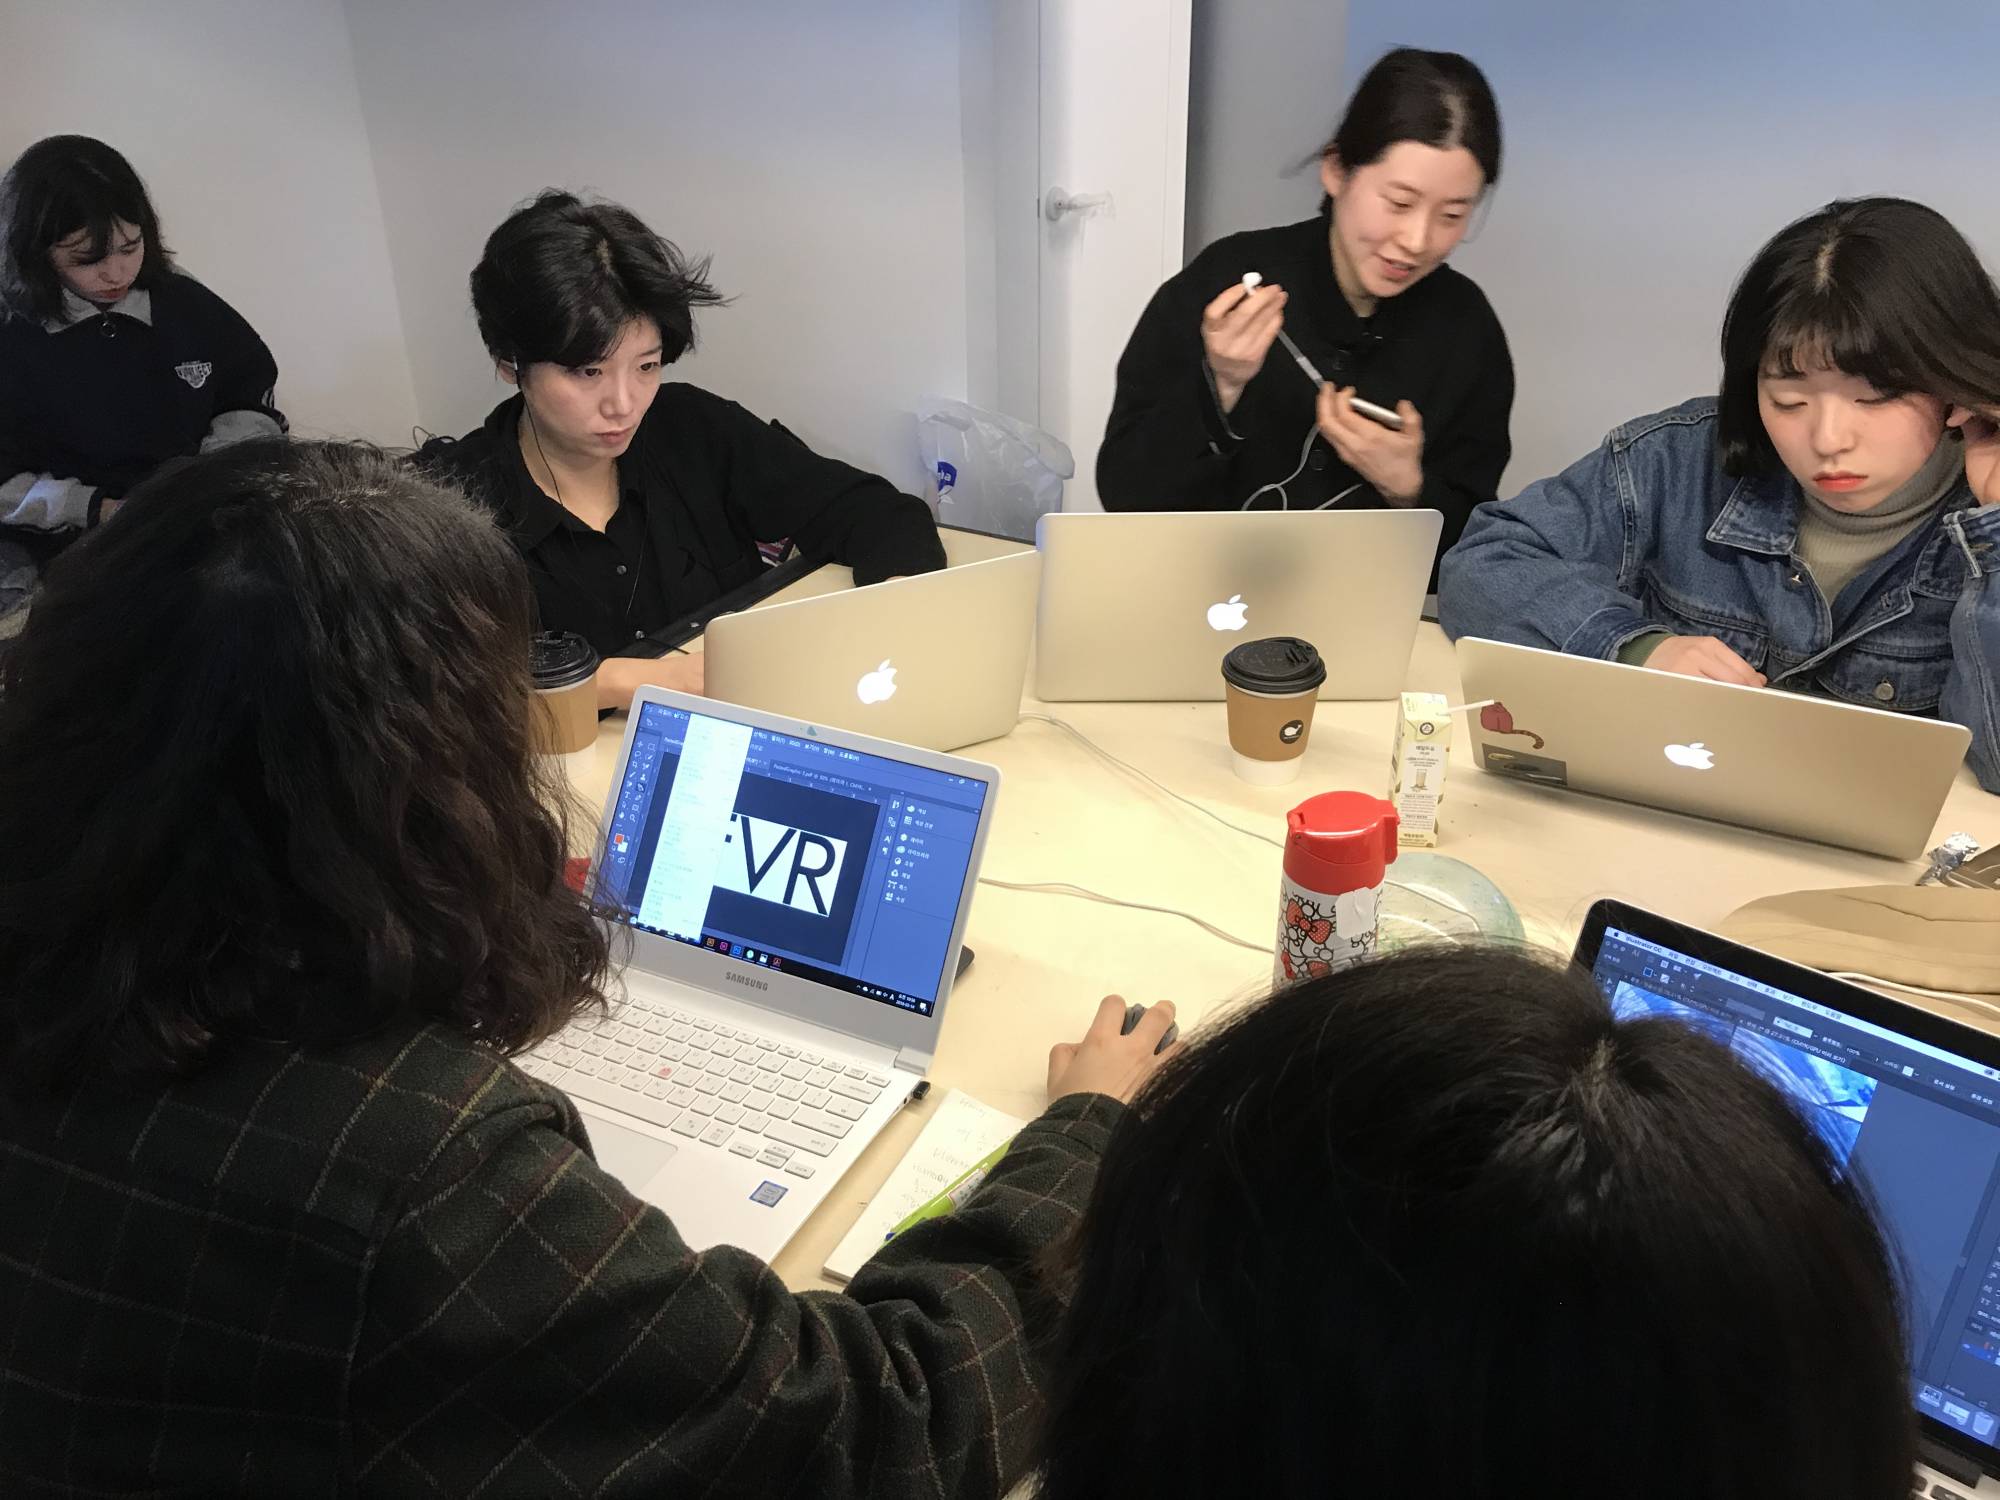 SfVR Workshop at Paju Institute of Typography